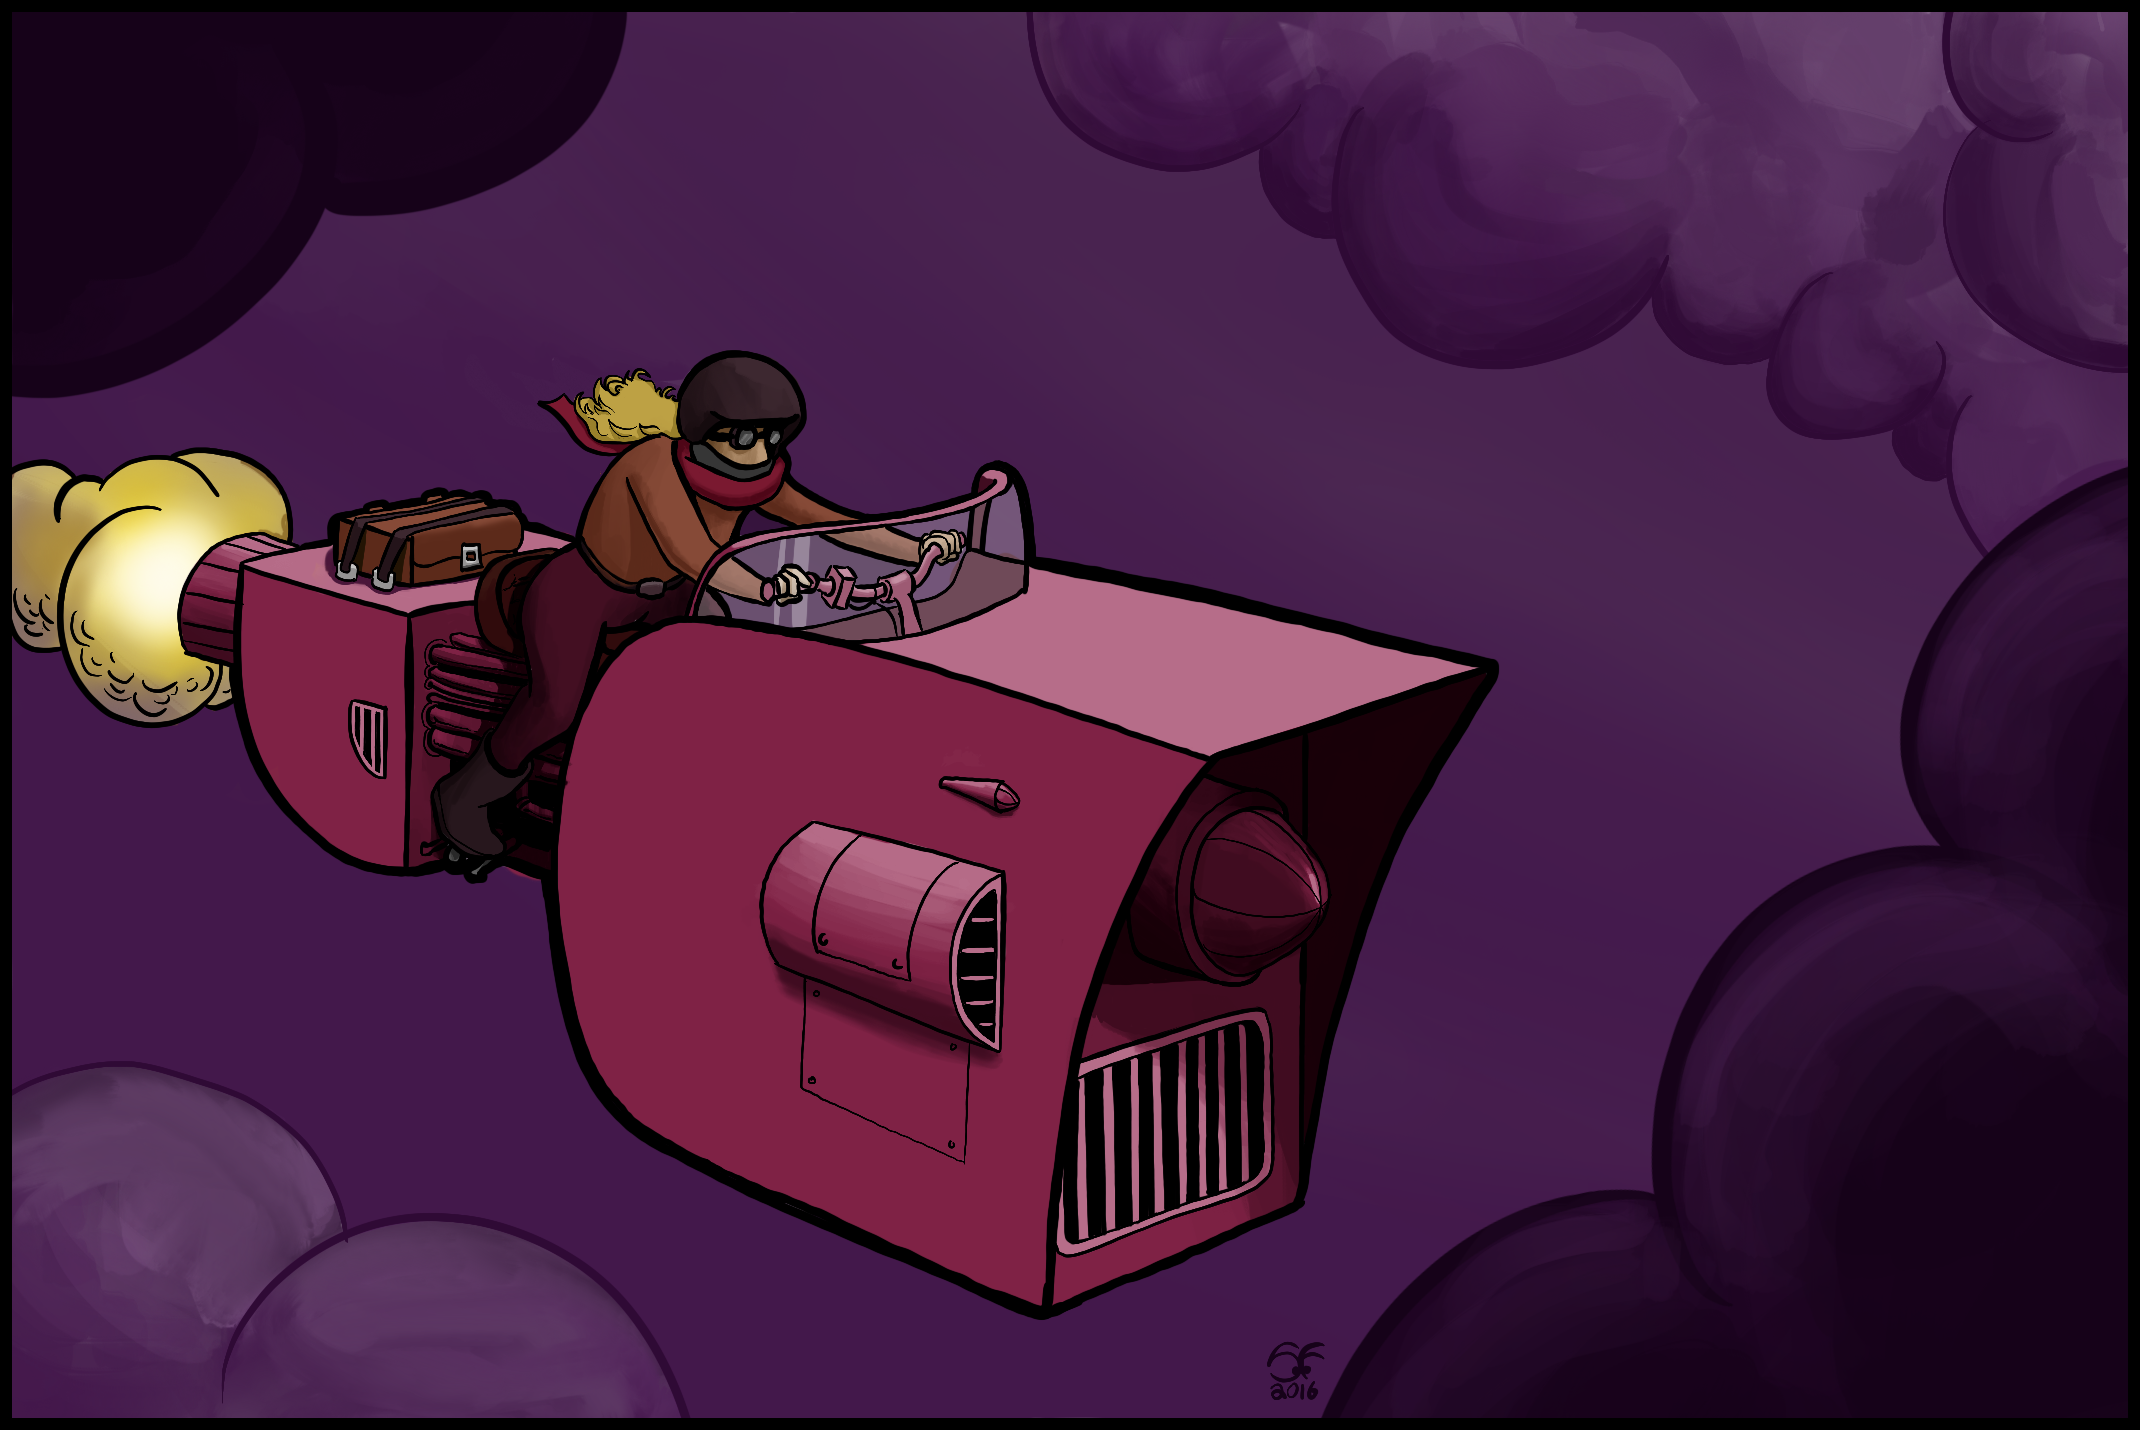 An illustration of a girl flying a giant hover bike through purple clouds